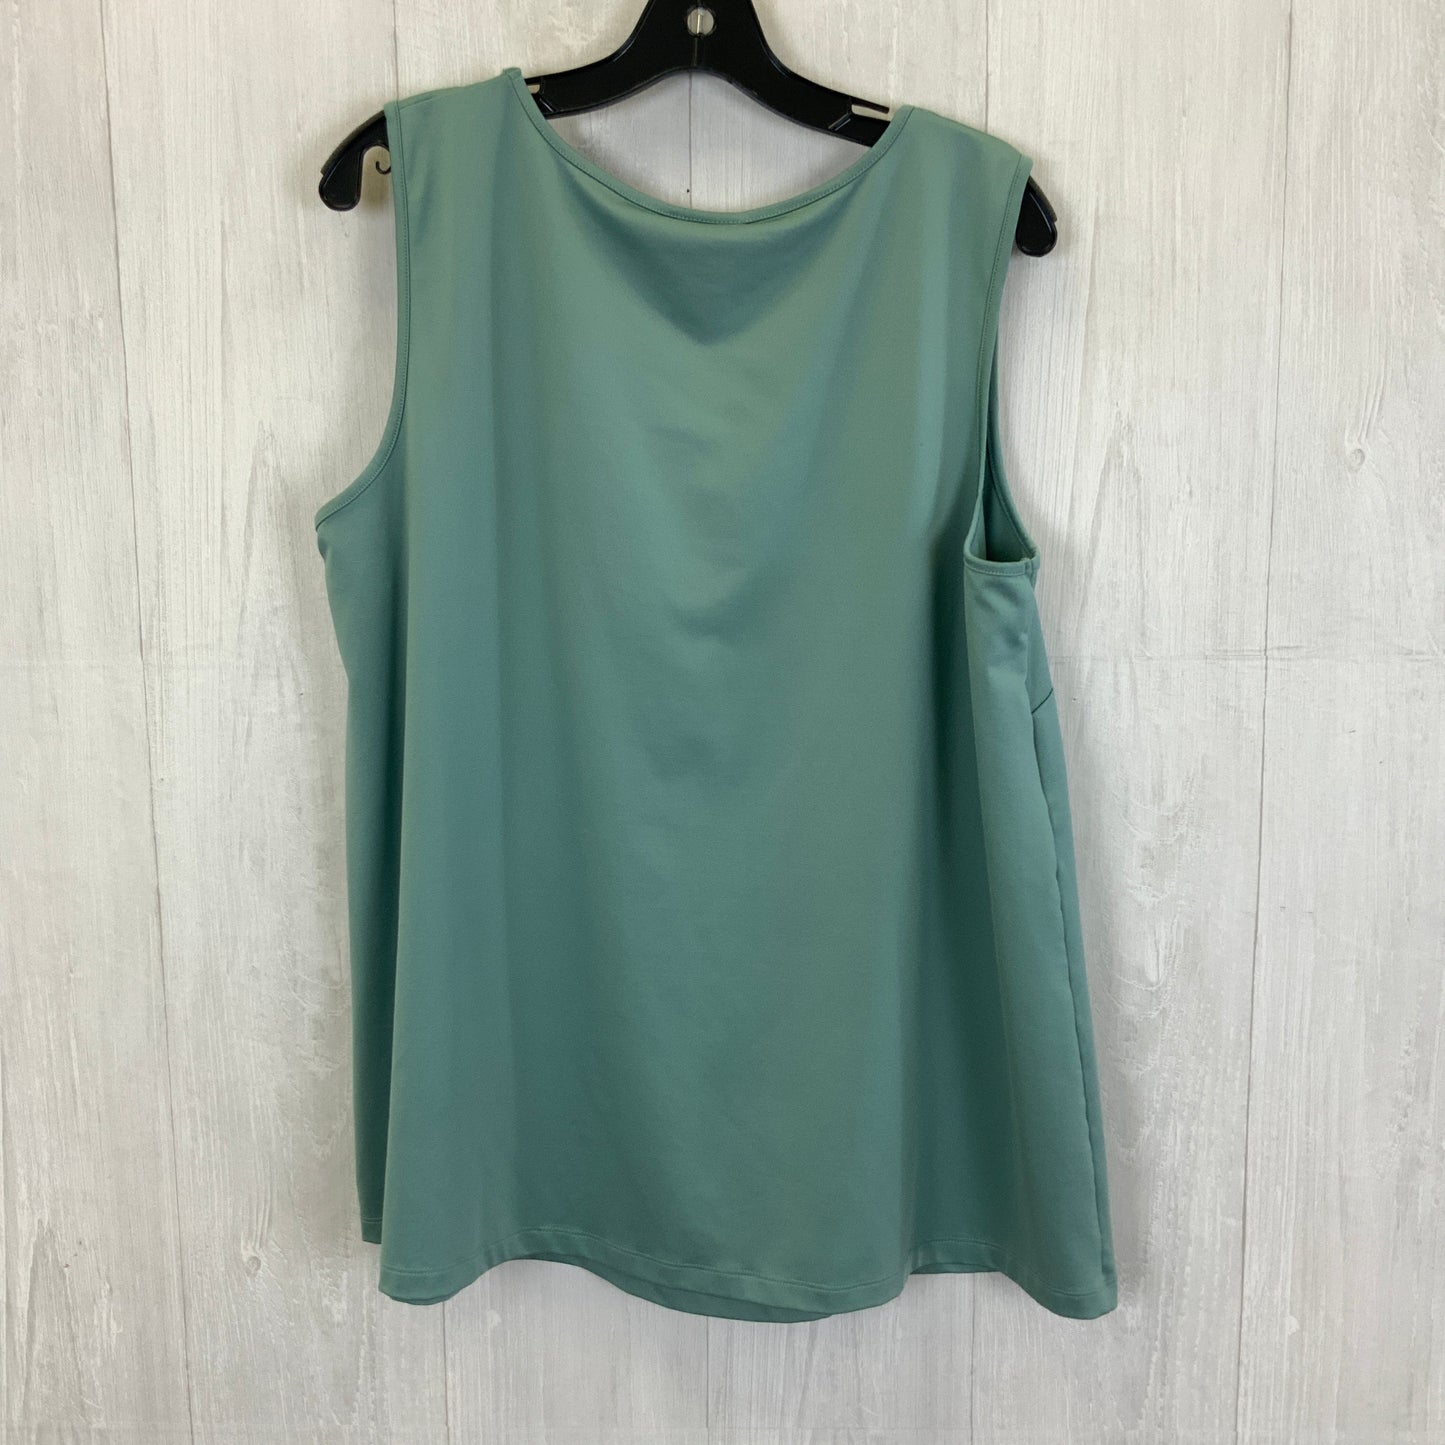 Green Tank Top Catherines, Size 1x